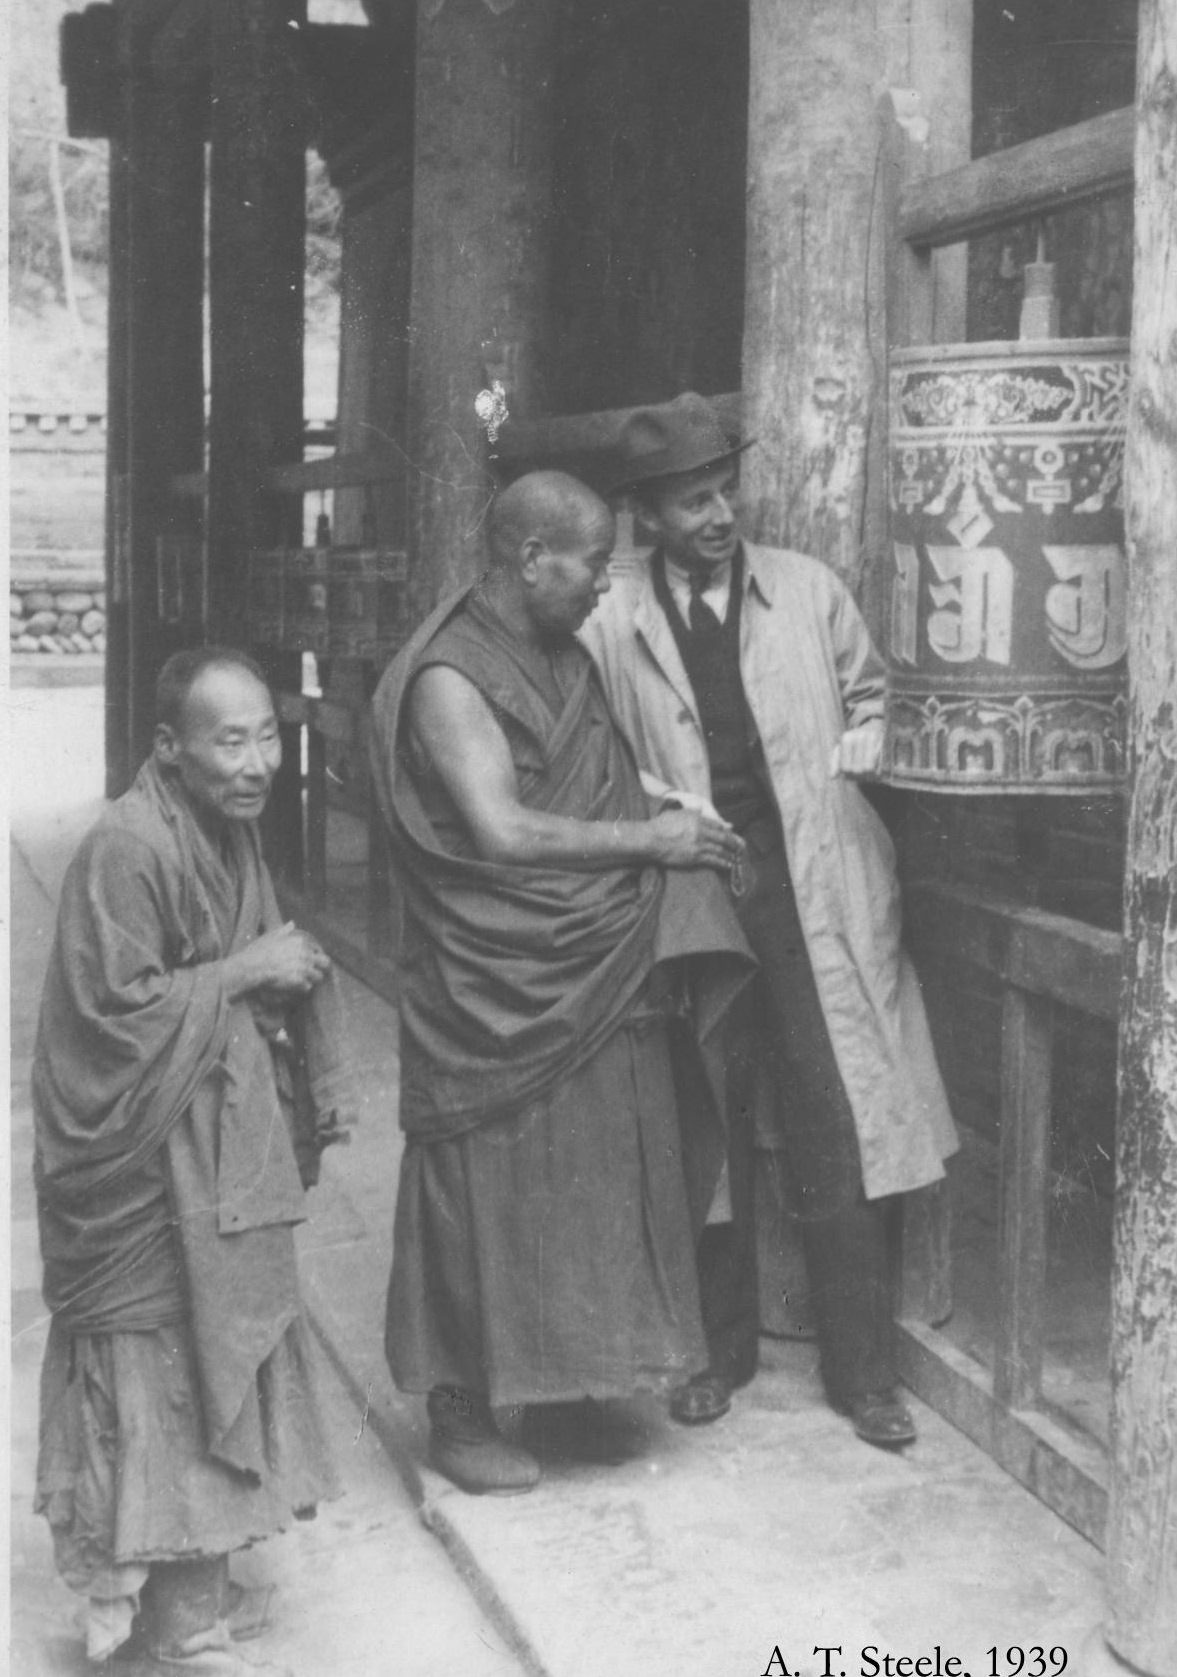 A.T. Steele With Two Monks From Kumbum Monastery, 1939